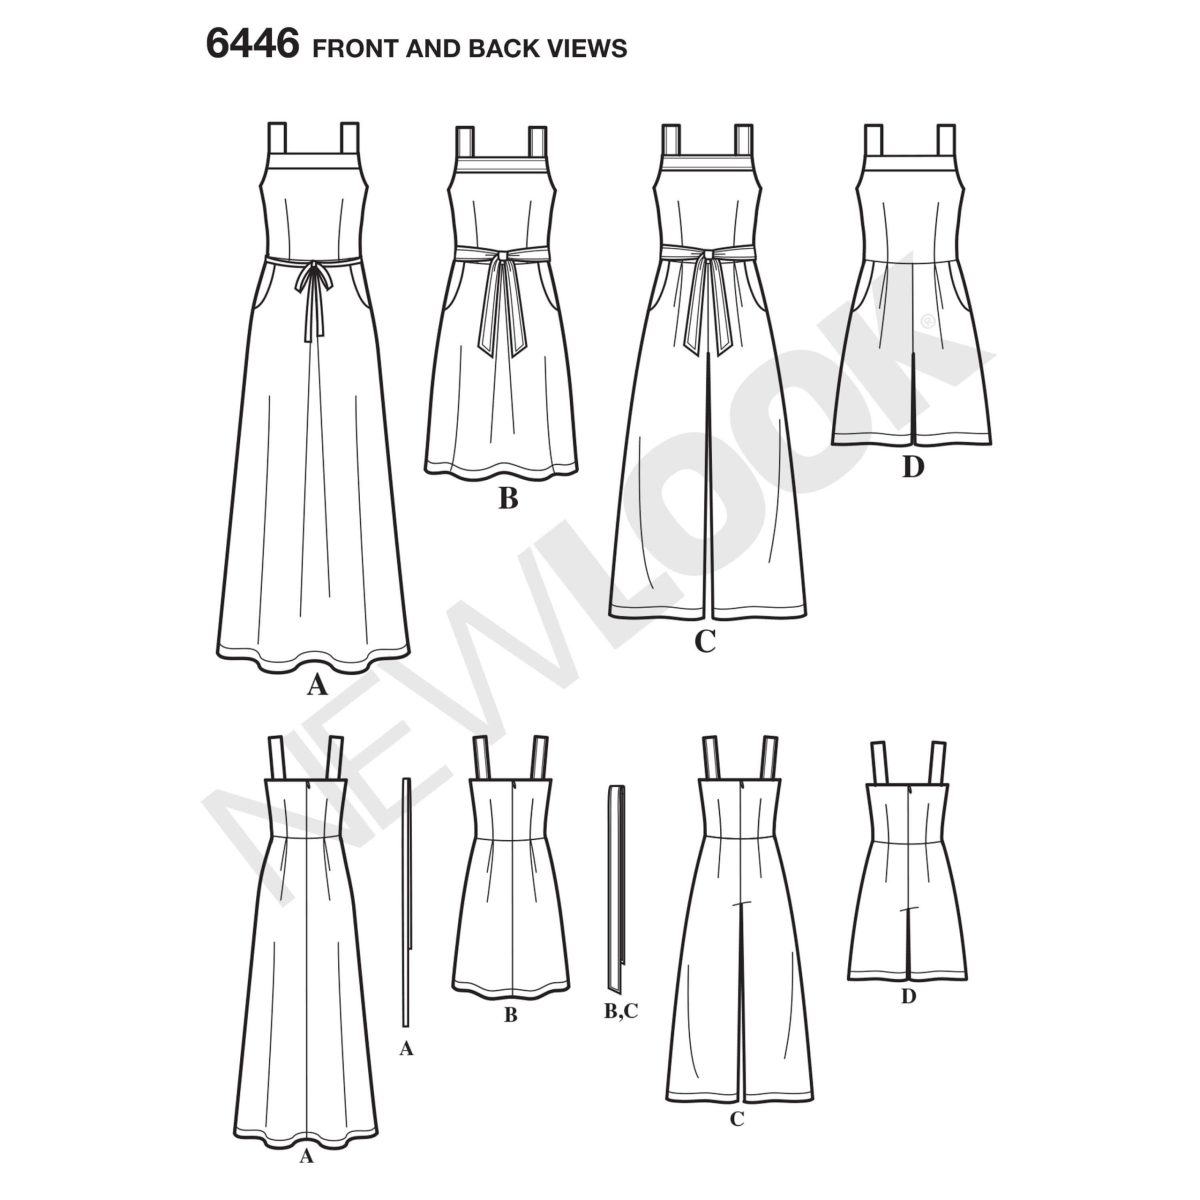 New Look Sewing Pattern N6446 Misses' Jumpsuits and Dresses